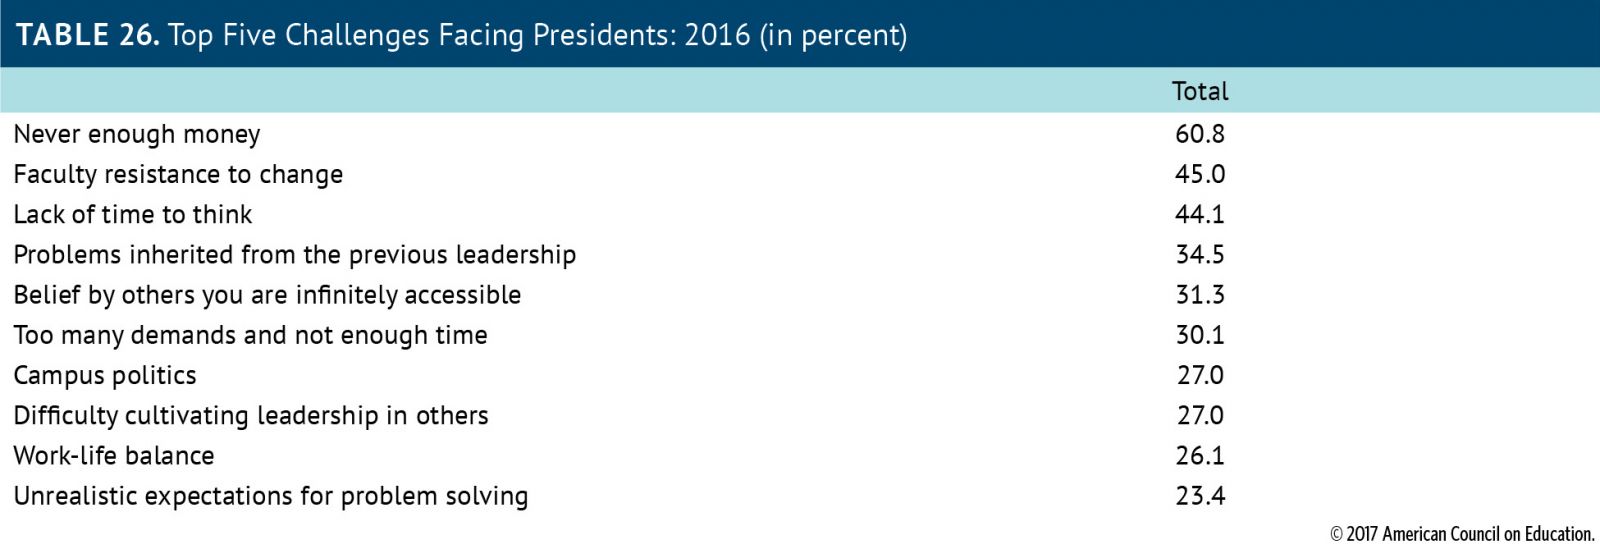 Chart: Top Five Challenges Facing Presidents, 2016 (in percentages): Never enough money, 60.8 percent; Faculty resistance to change, 45 percent; Lack of time to think, 44.1 percent; Problems inherited from the previous leadership, 34.5 percent; Belief by others you are infinitely accessible, 31.3 percent; Too many demands and not enough time, 30.1 percent; Campus politics, 27 percent; Difficulty cultivating leadership in others, 27 percent; Work-life balance, 26.1 percent; Unrealistic expectations for problem solving, 23.4 percent.